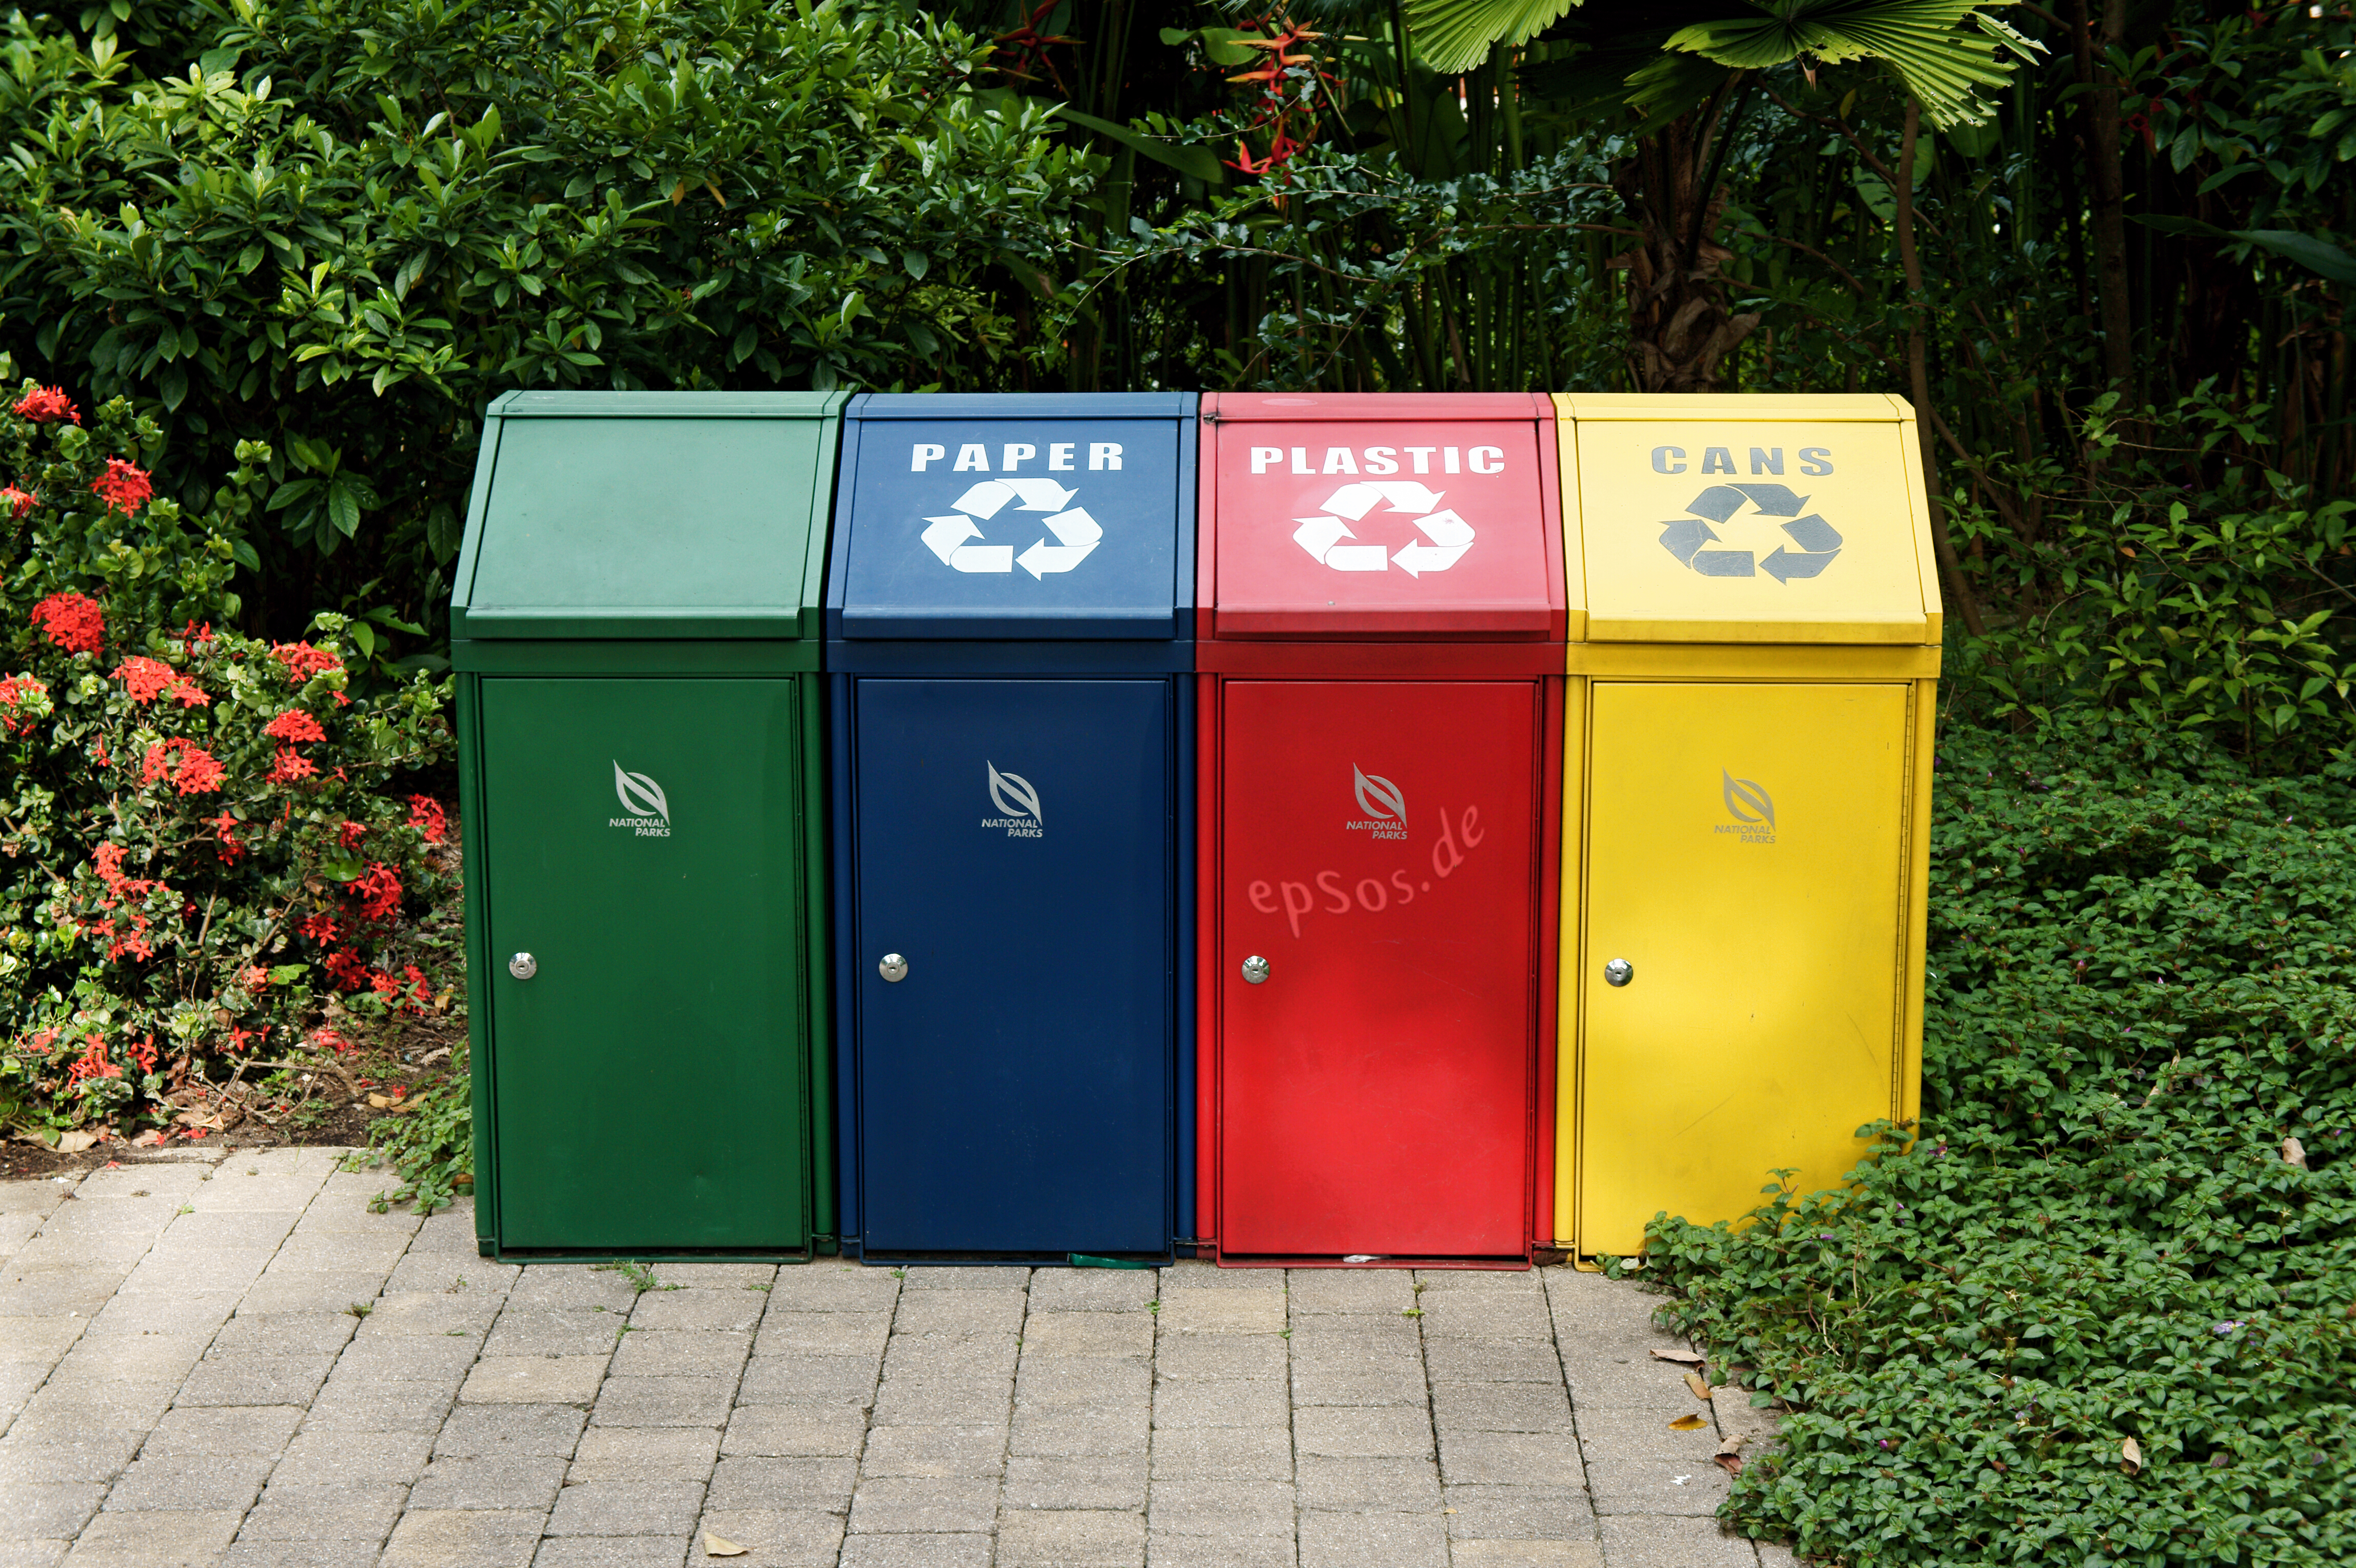 File:Trash Recycling with Disposal Containers.jpg - Wikimedia Commons